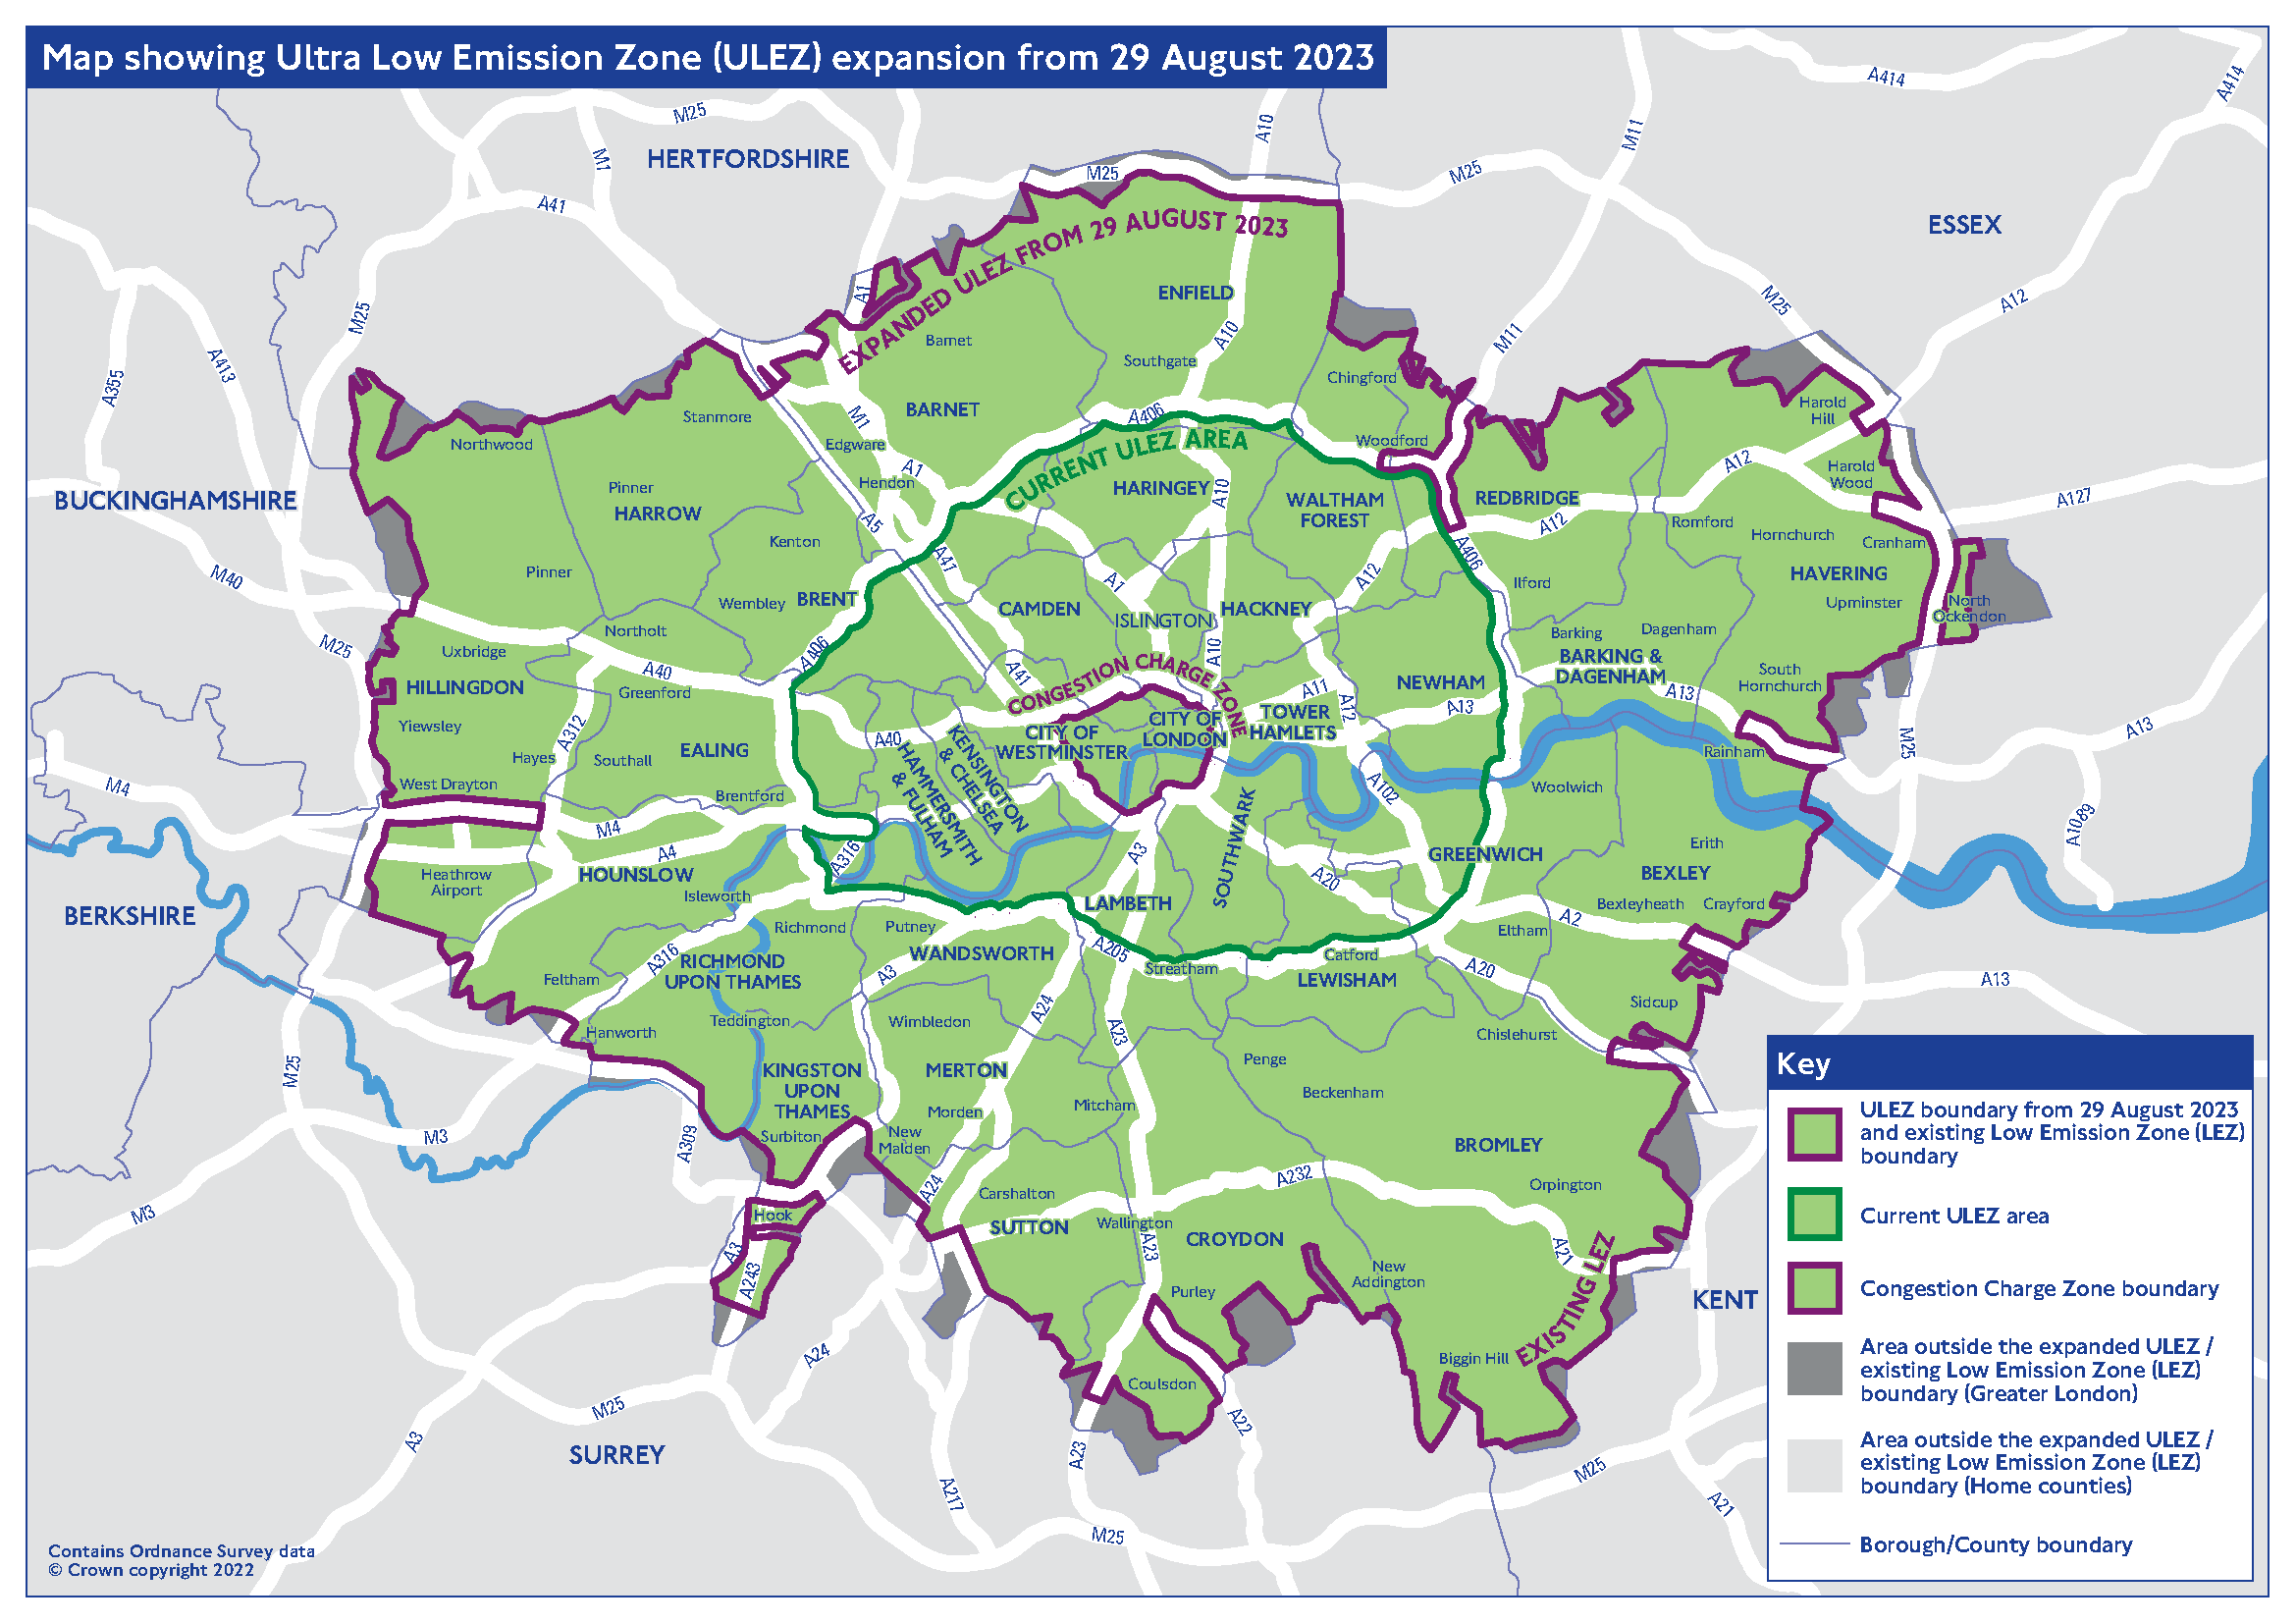 ULEZ map and expansion